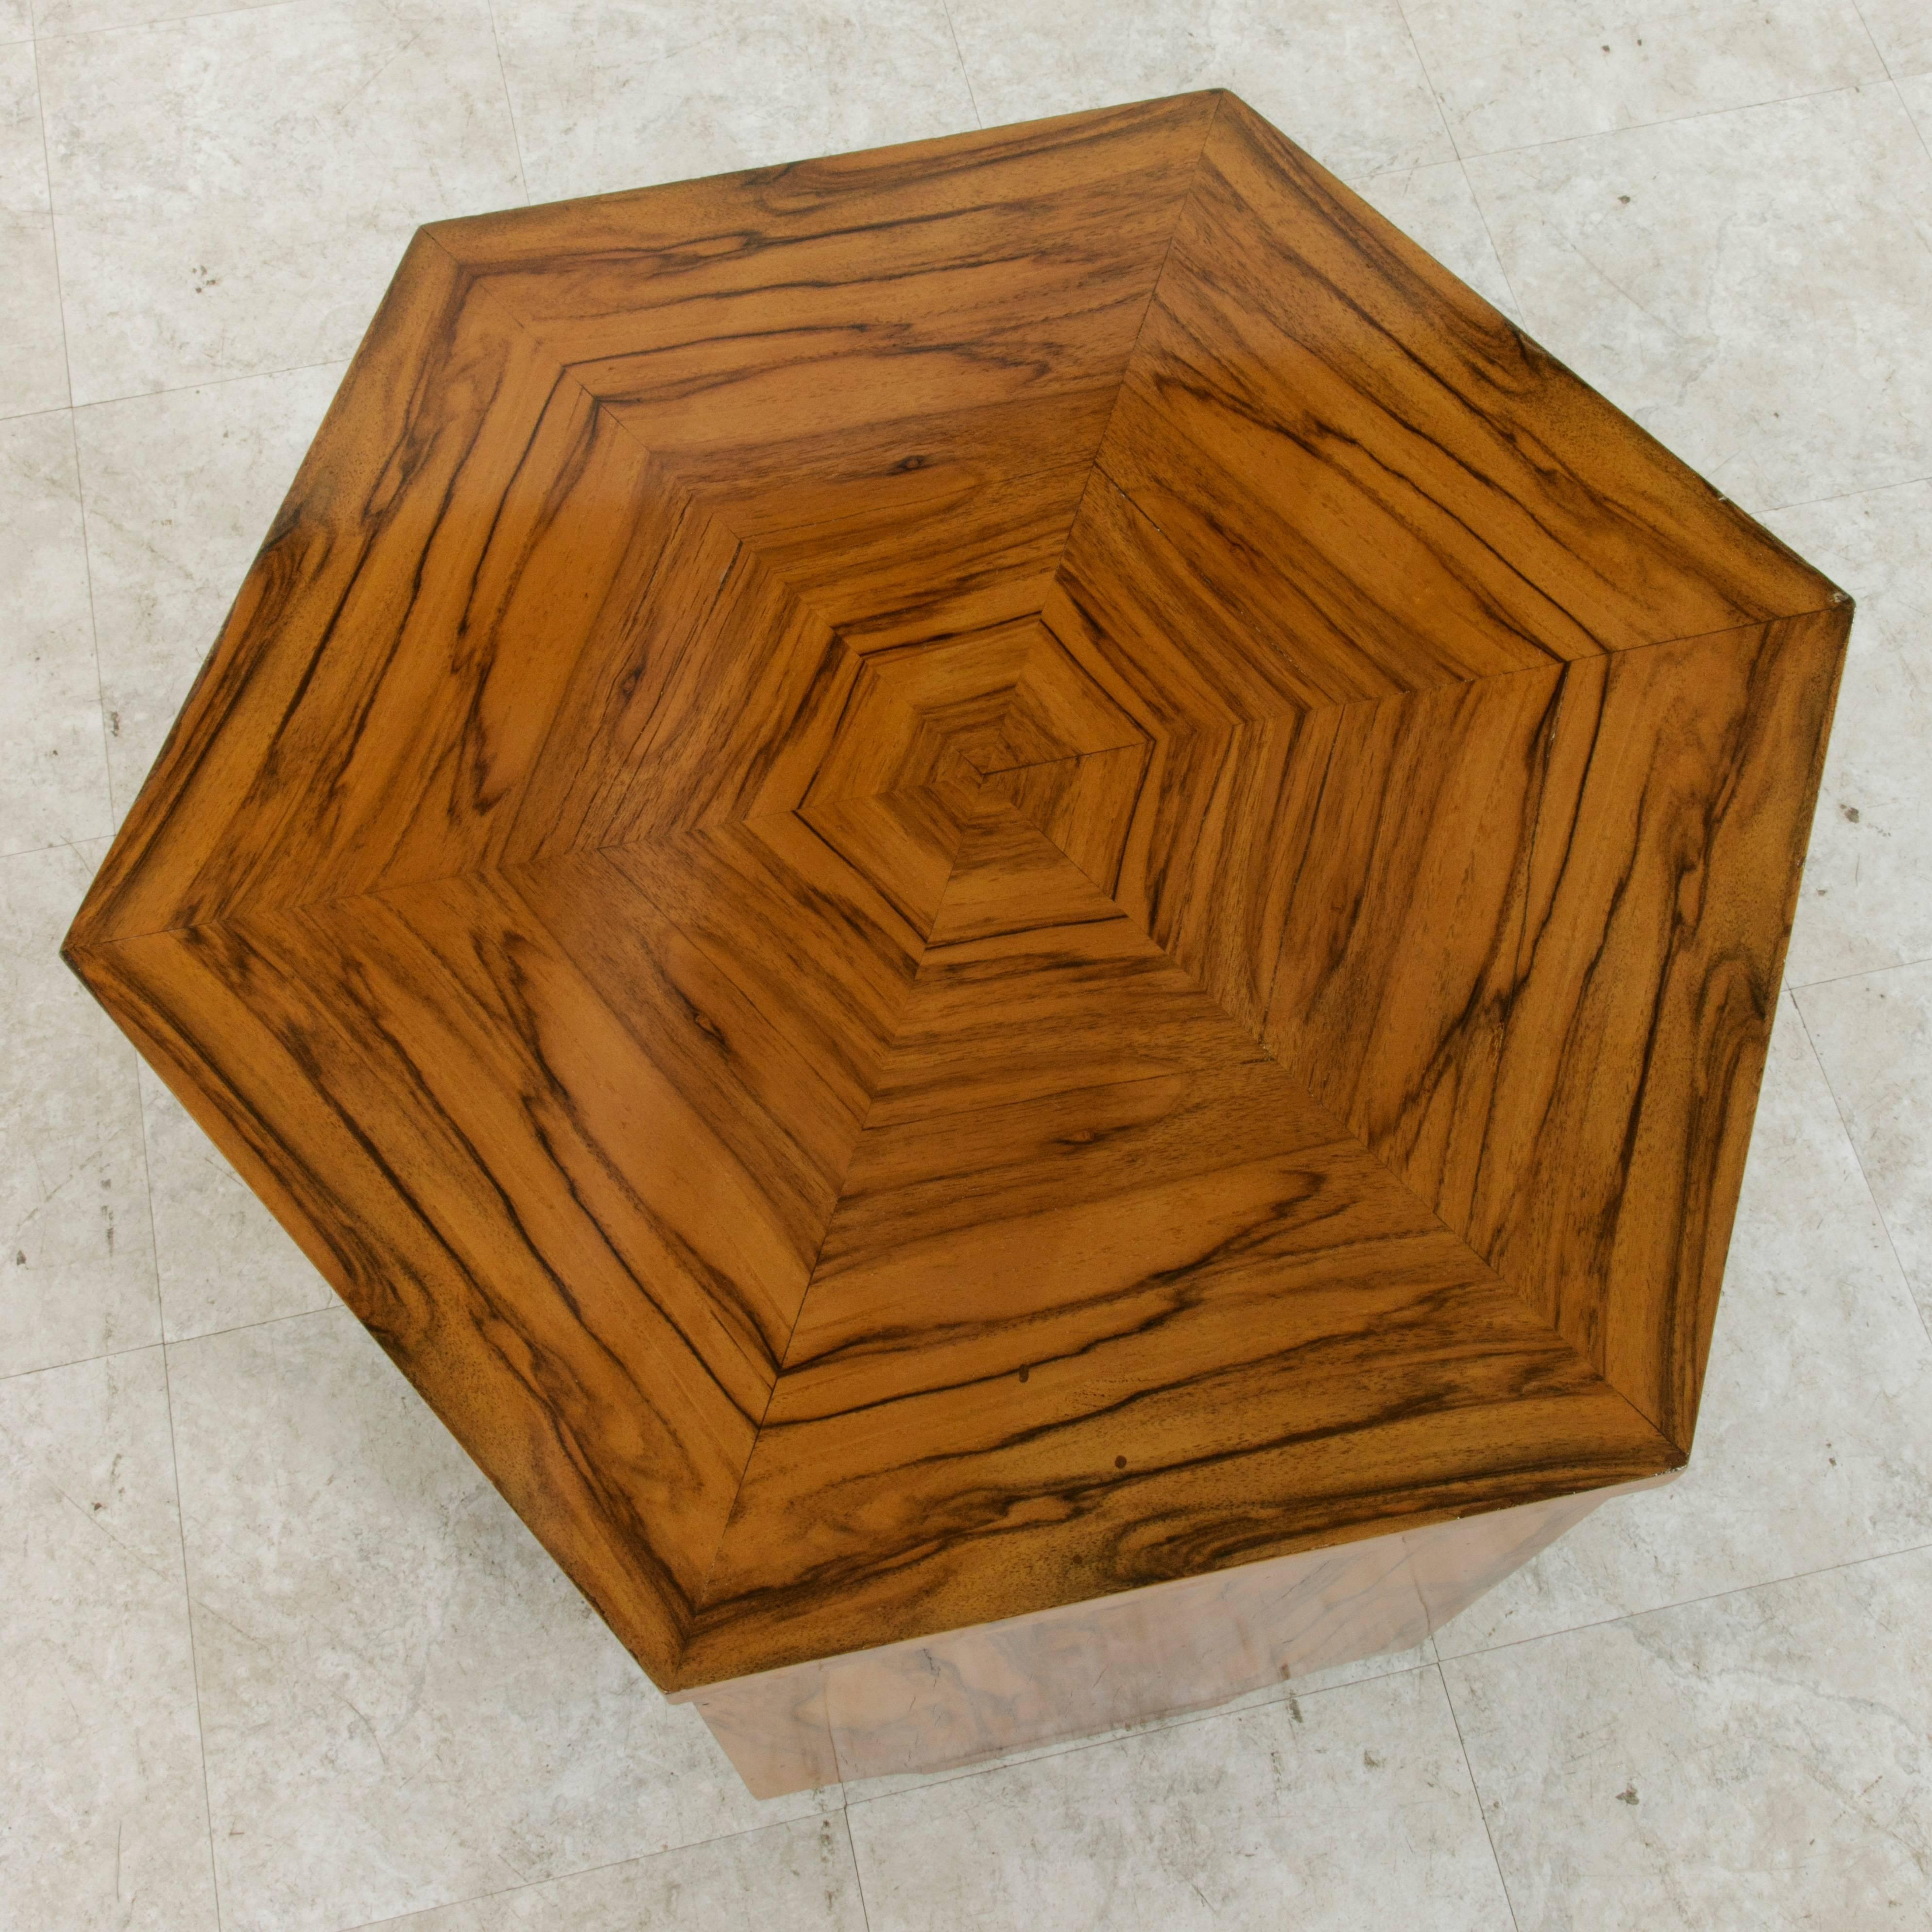 Hexagonal in form, this stunning French side table or end table from the Art Deco period features a book matched burled walnut top and sides. A lower book matched shelf allows for additional display space. Open on three sides and finished all